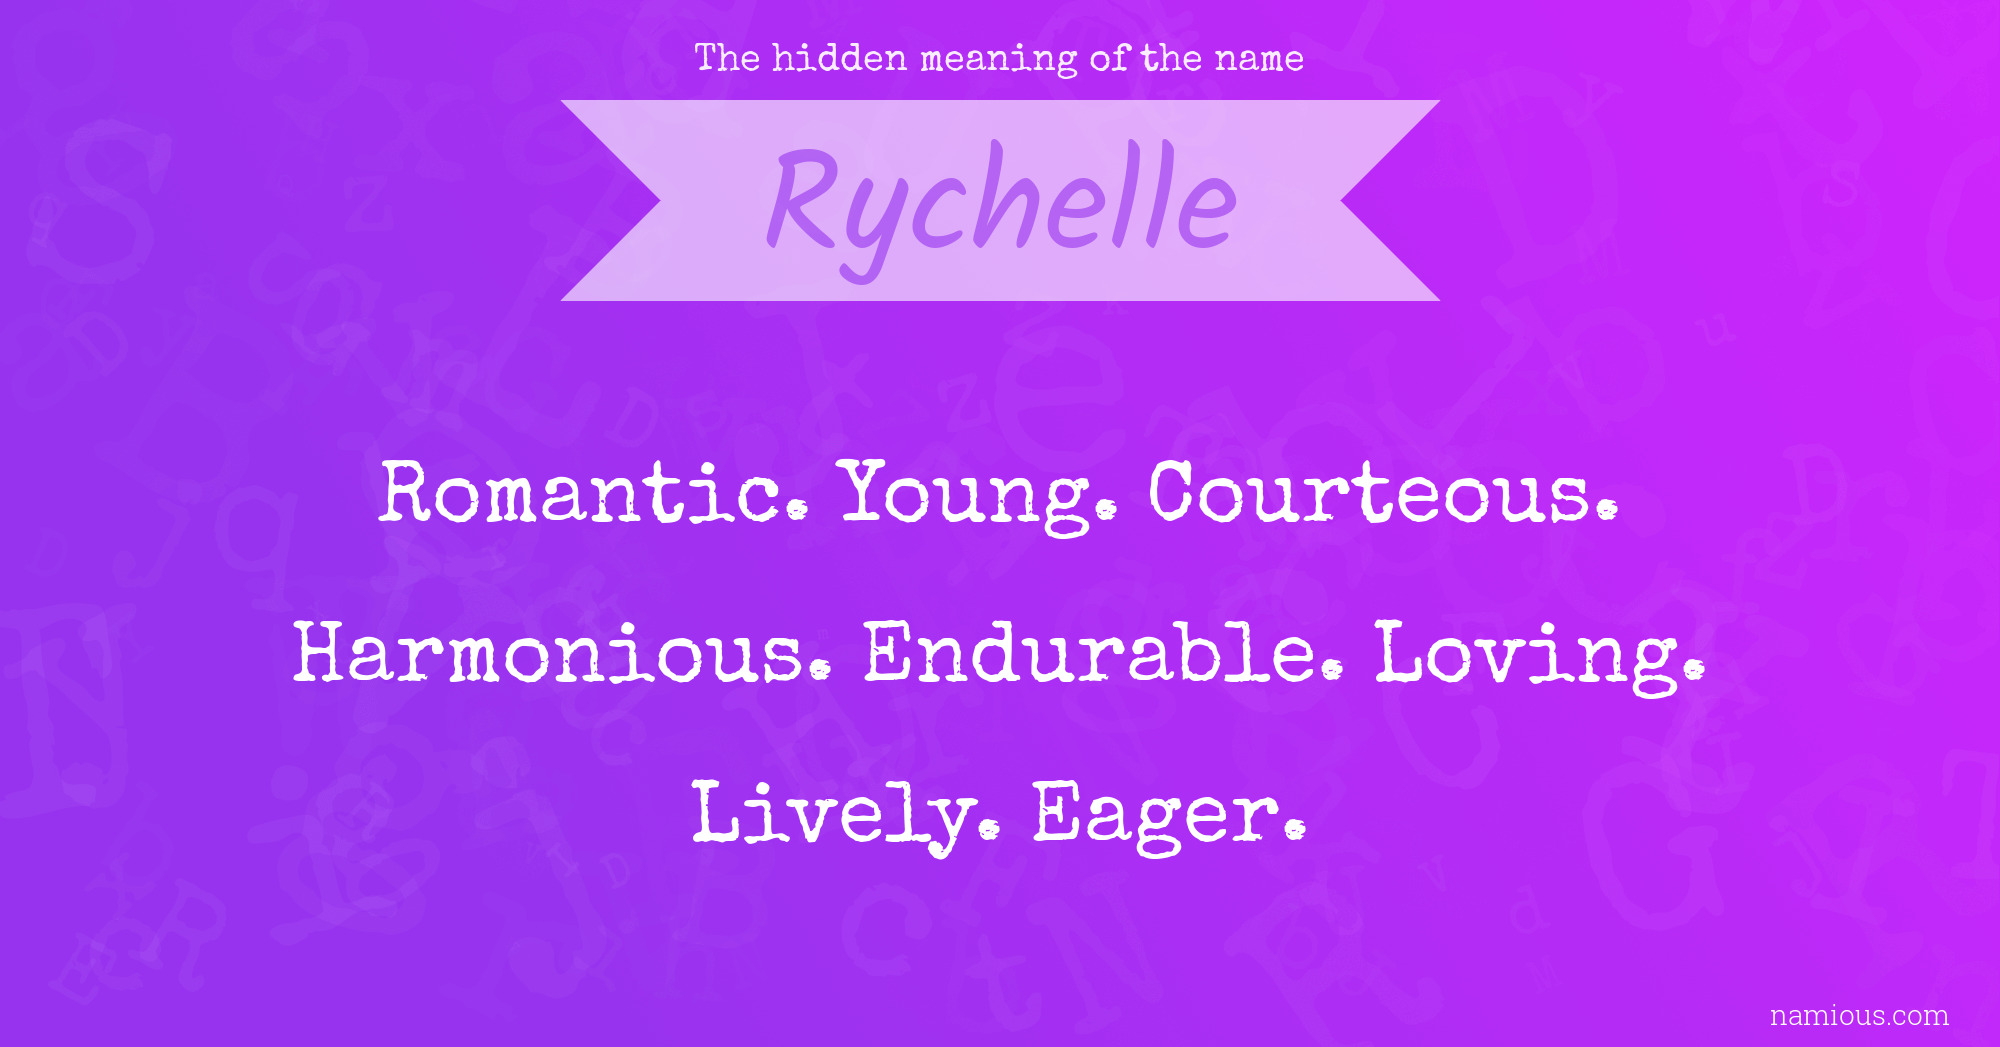 The hidden meaning of the name Rychelle